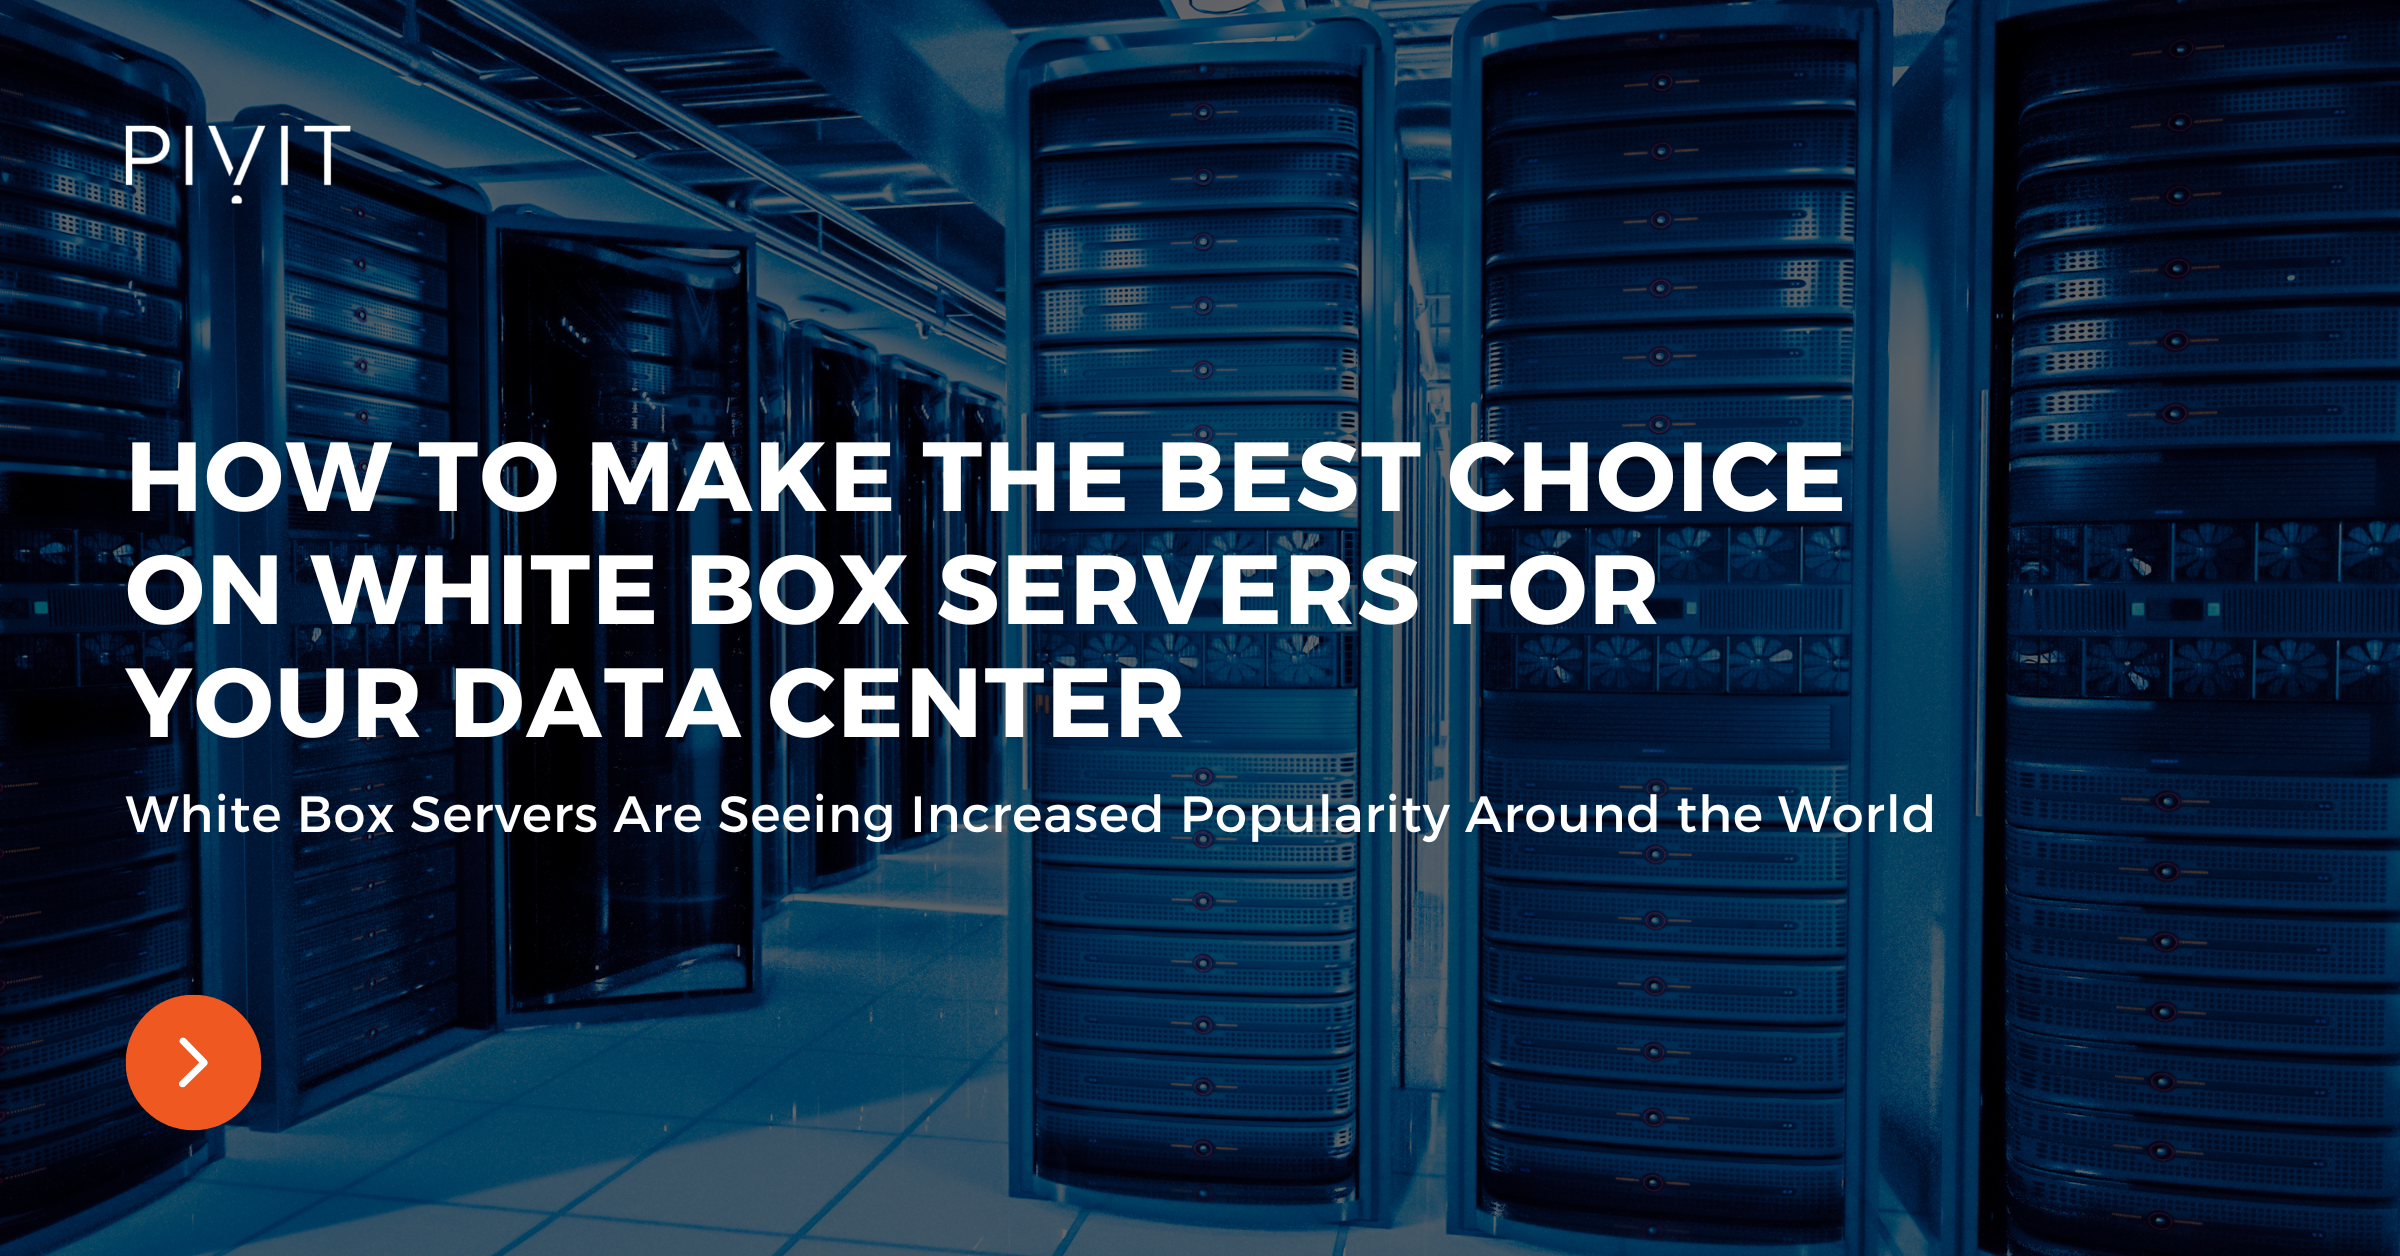 How to Make the Best Choice on White Box Servers for Your Data Center